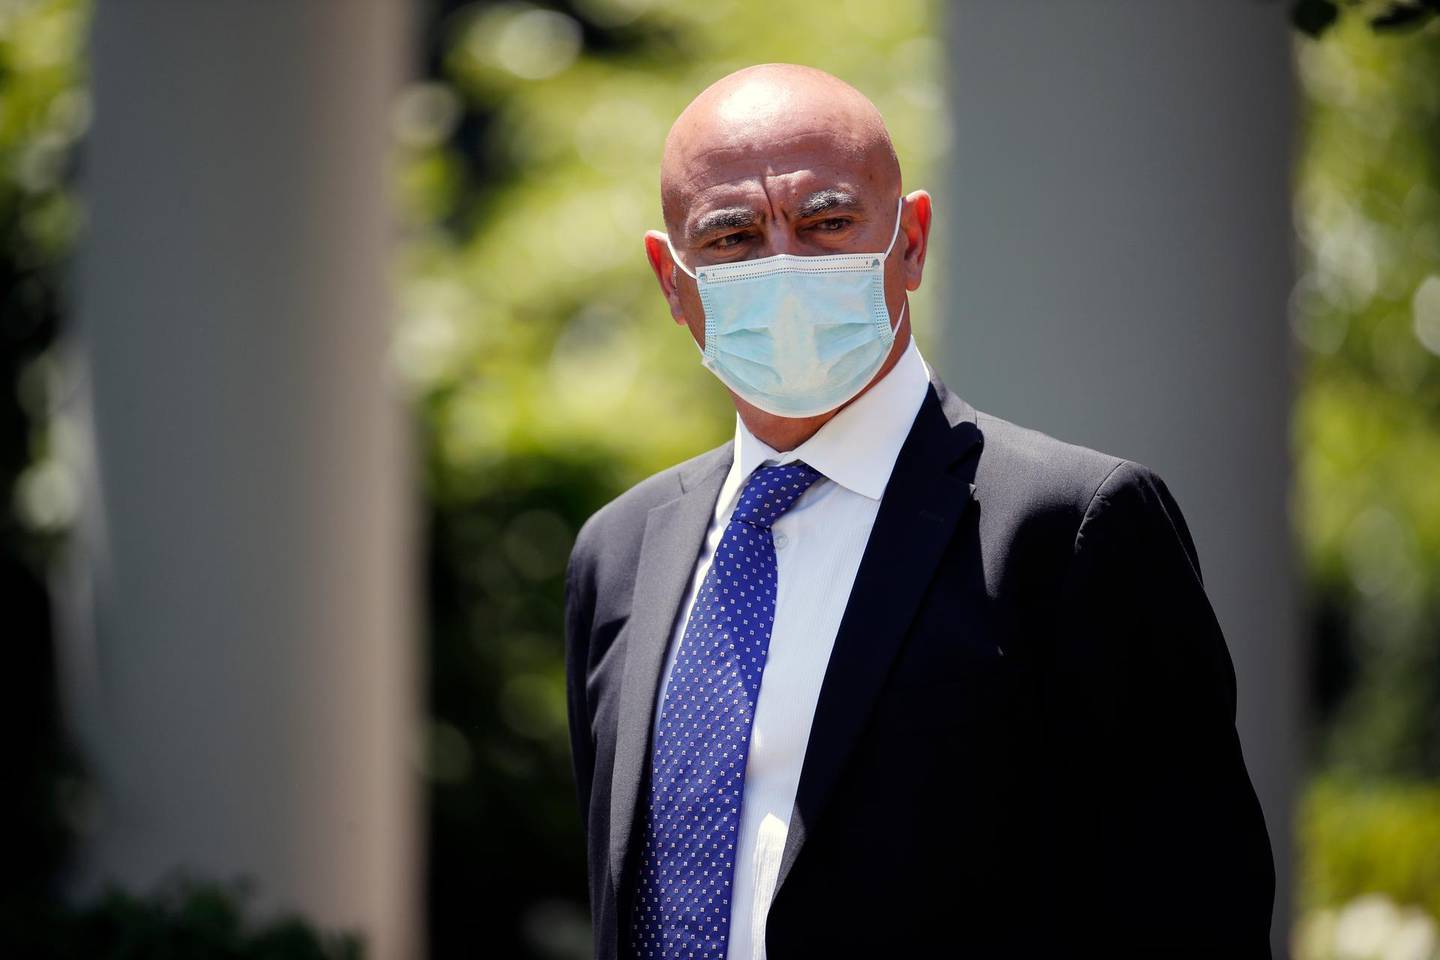 Moncef Slaoui, a former GlaxoSmithKline executive, listens as President Donald Trump speaks about the coronavirus in the Rose Garden of the White House, Friday, May 15, 2020, in Washington. (AP Photo/Alex Brandon)